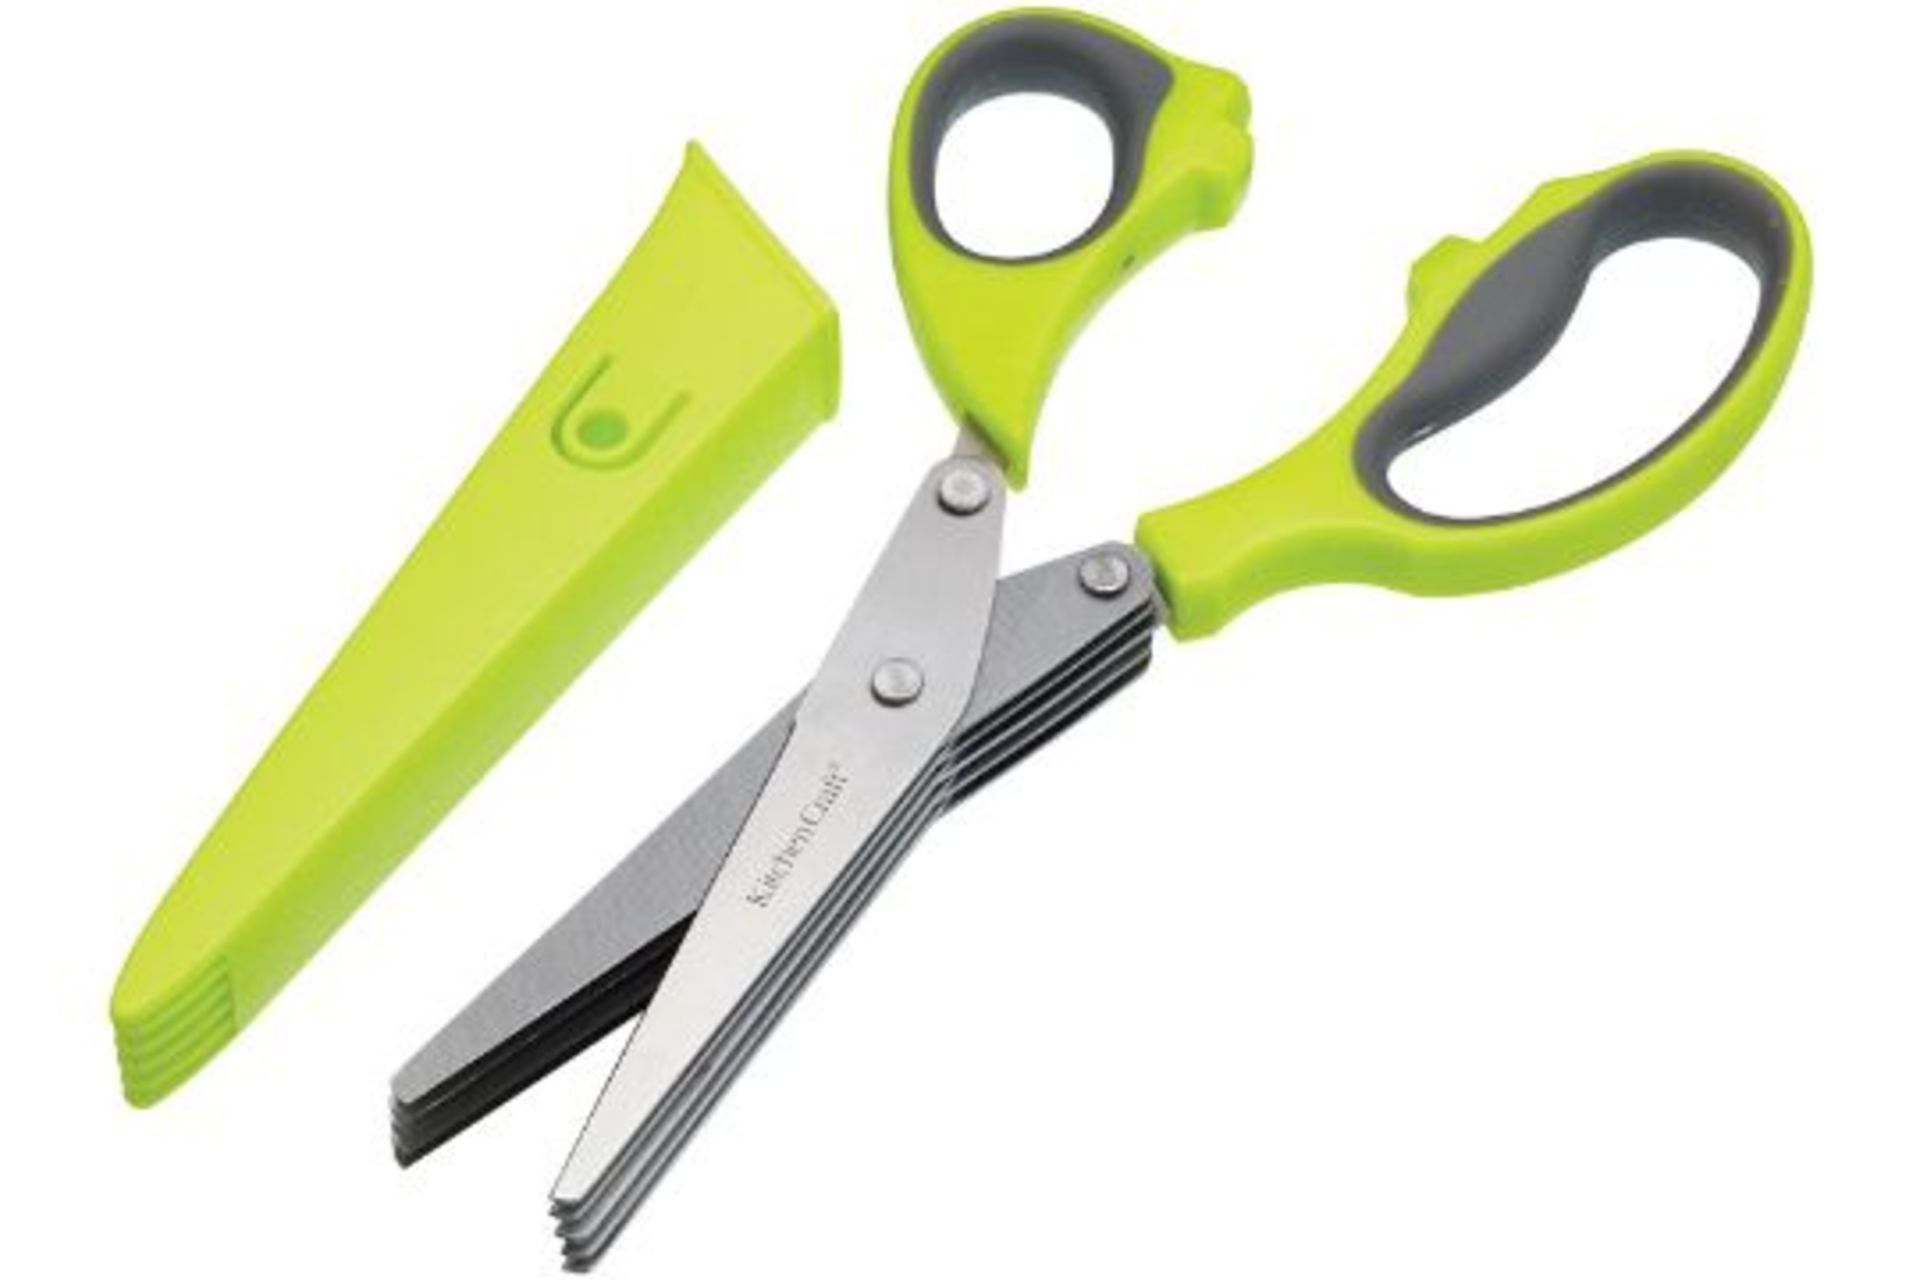 X2 BRAND NEW GARDEN CHEF HERB SCISSORS AND CASE - RRP £7.49 EACH